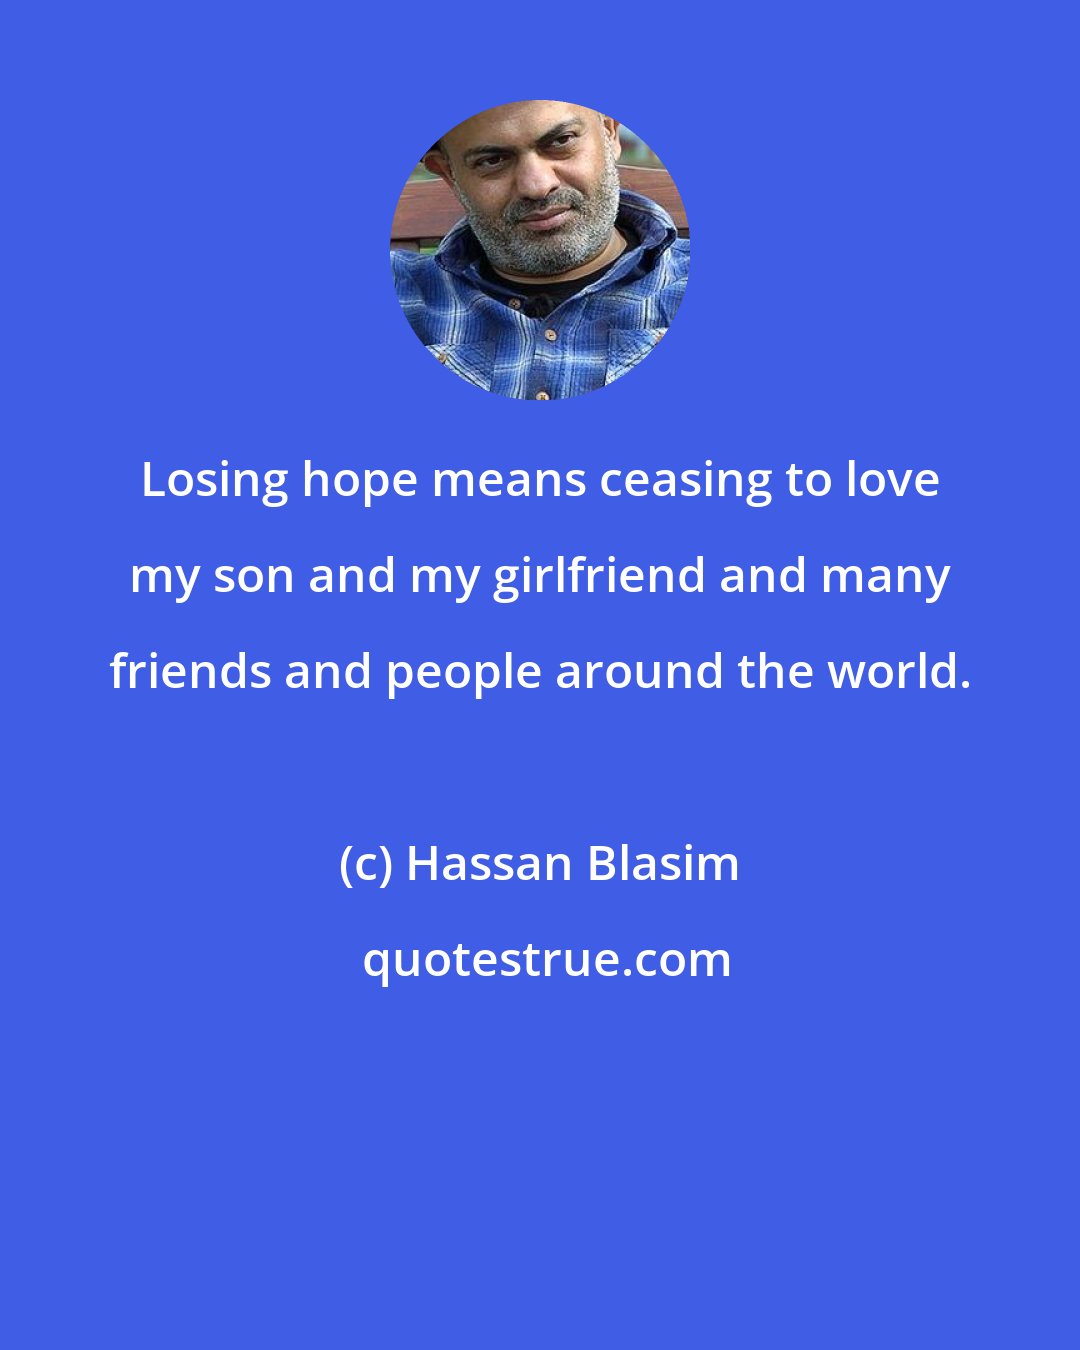 Hassan Blasim: Losing hope means ceasing to love my son and my girlfriend and many friends and people around the world.